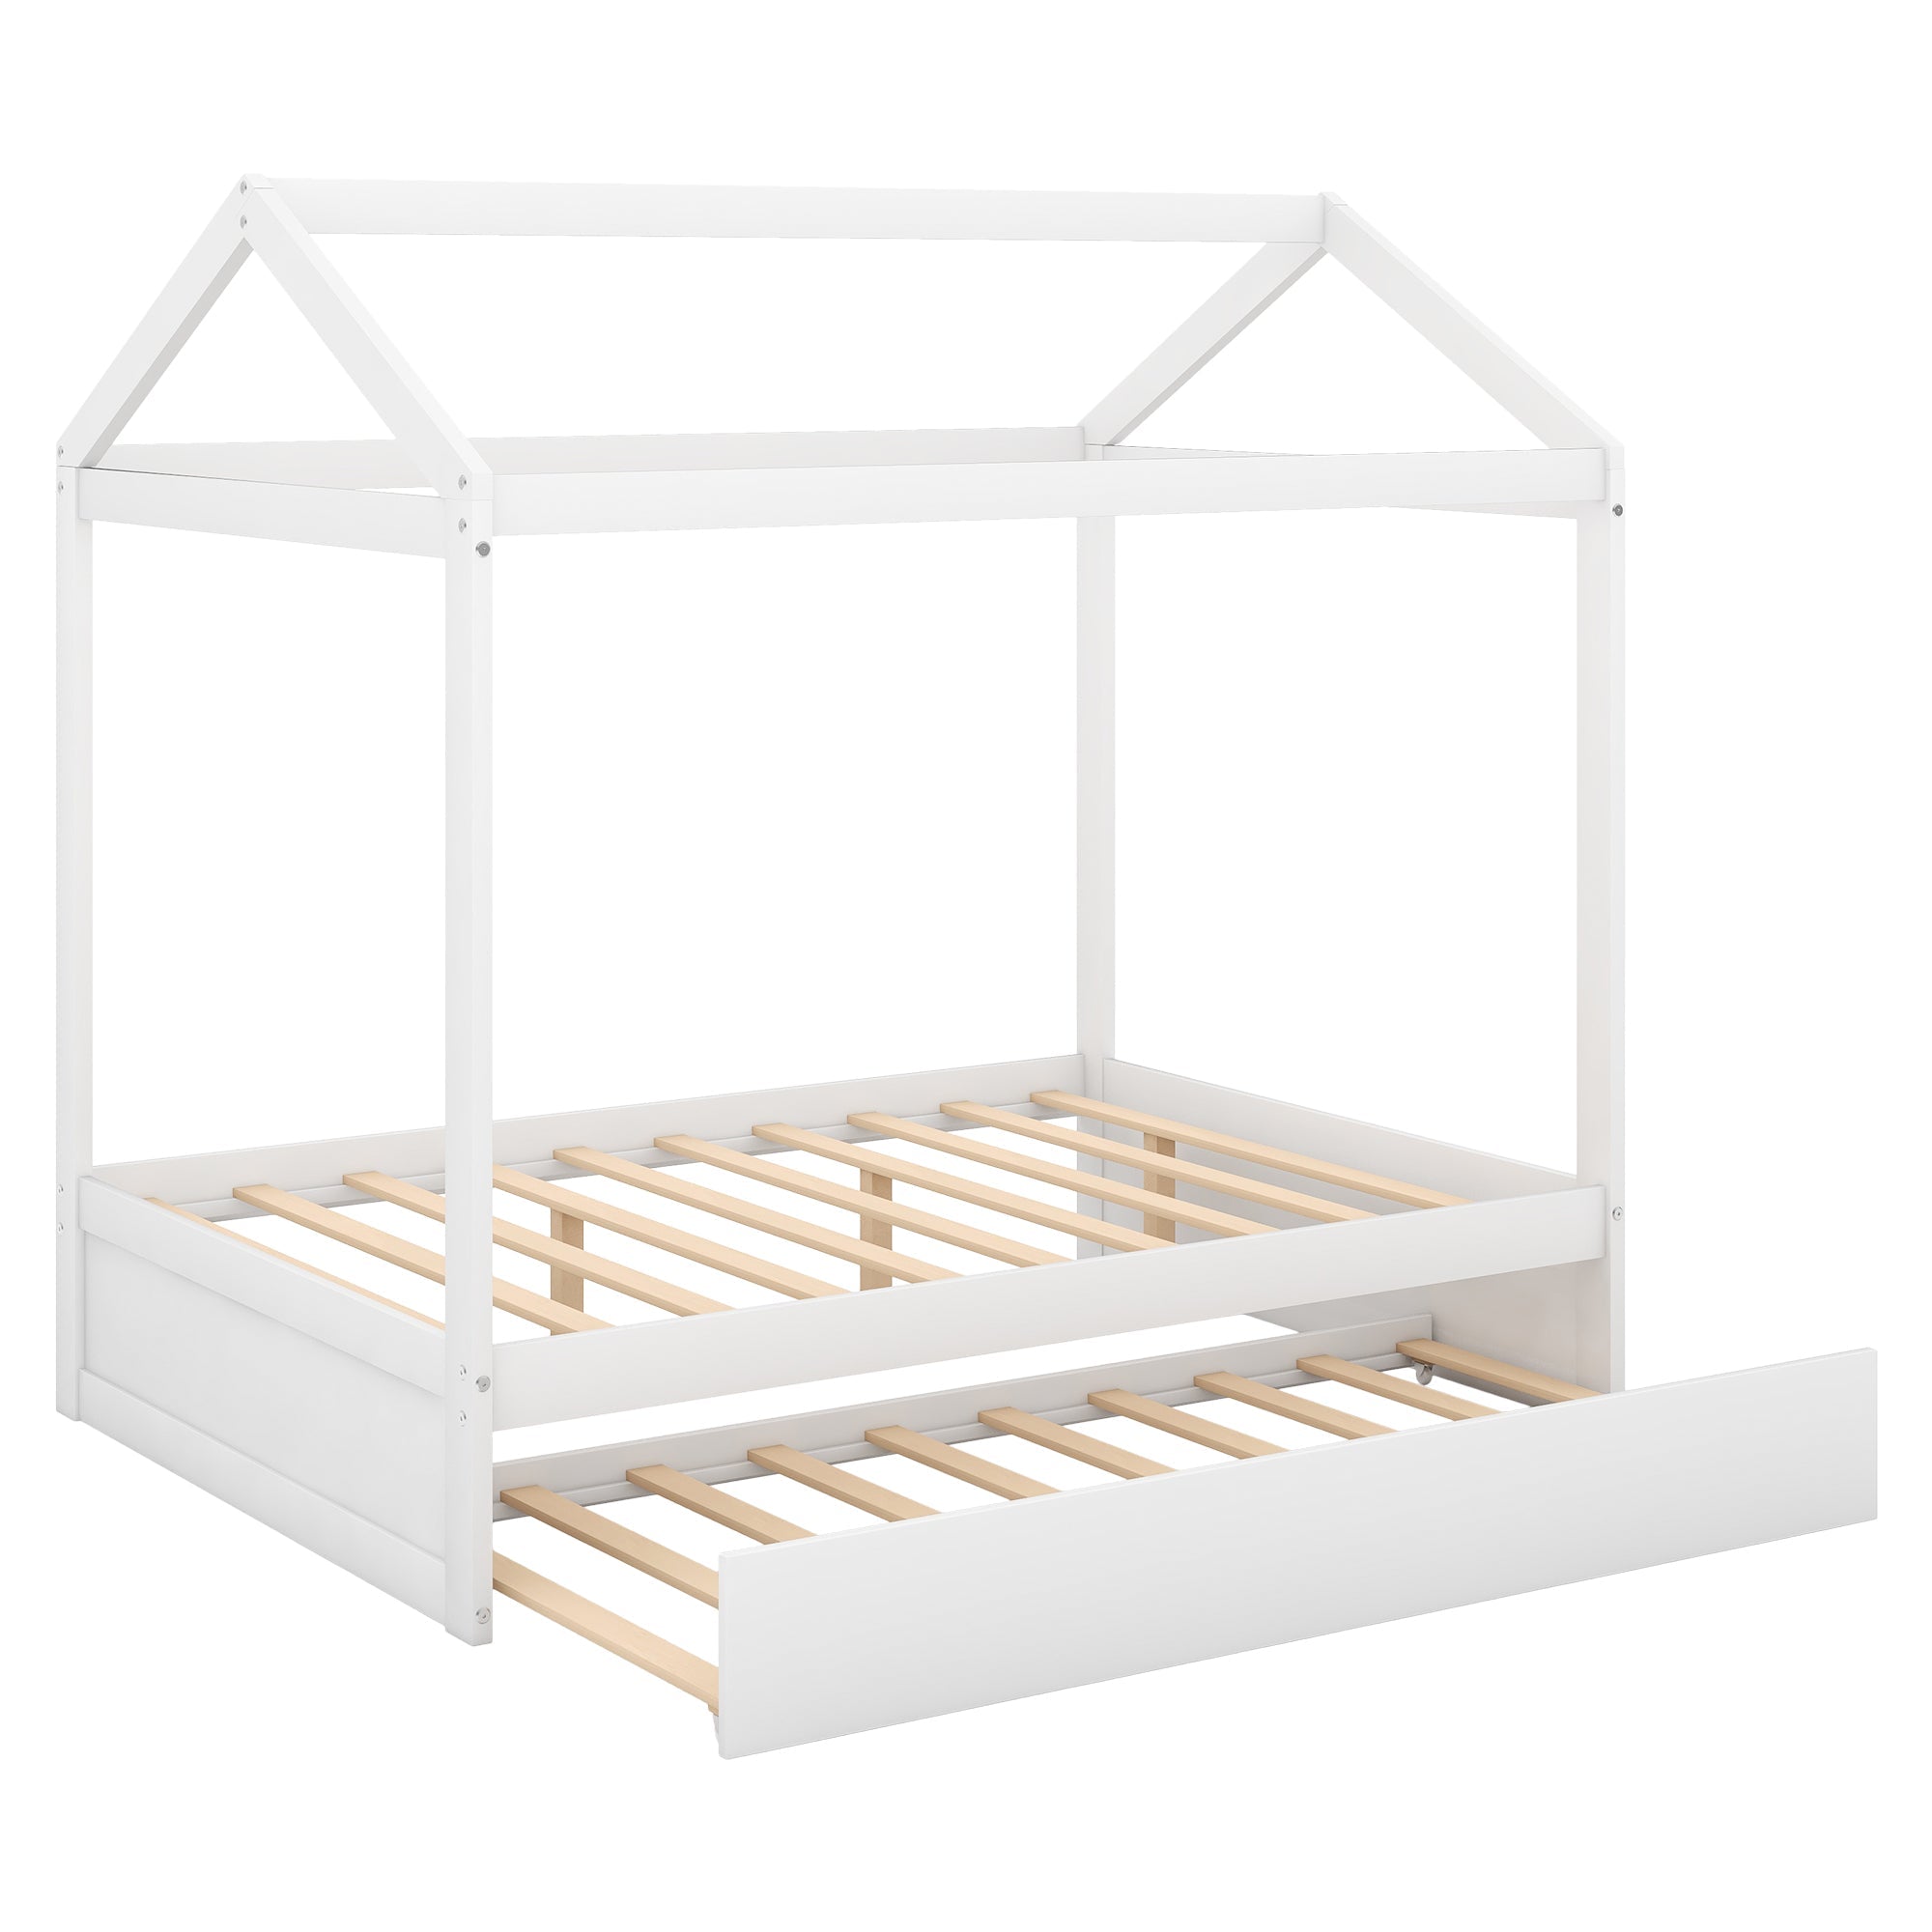 Pine Wood Full Size Beach House Bed With Trundle for Kids Bedroom, White